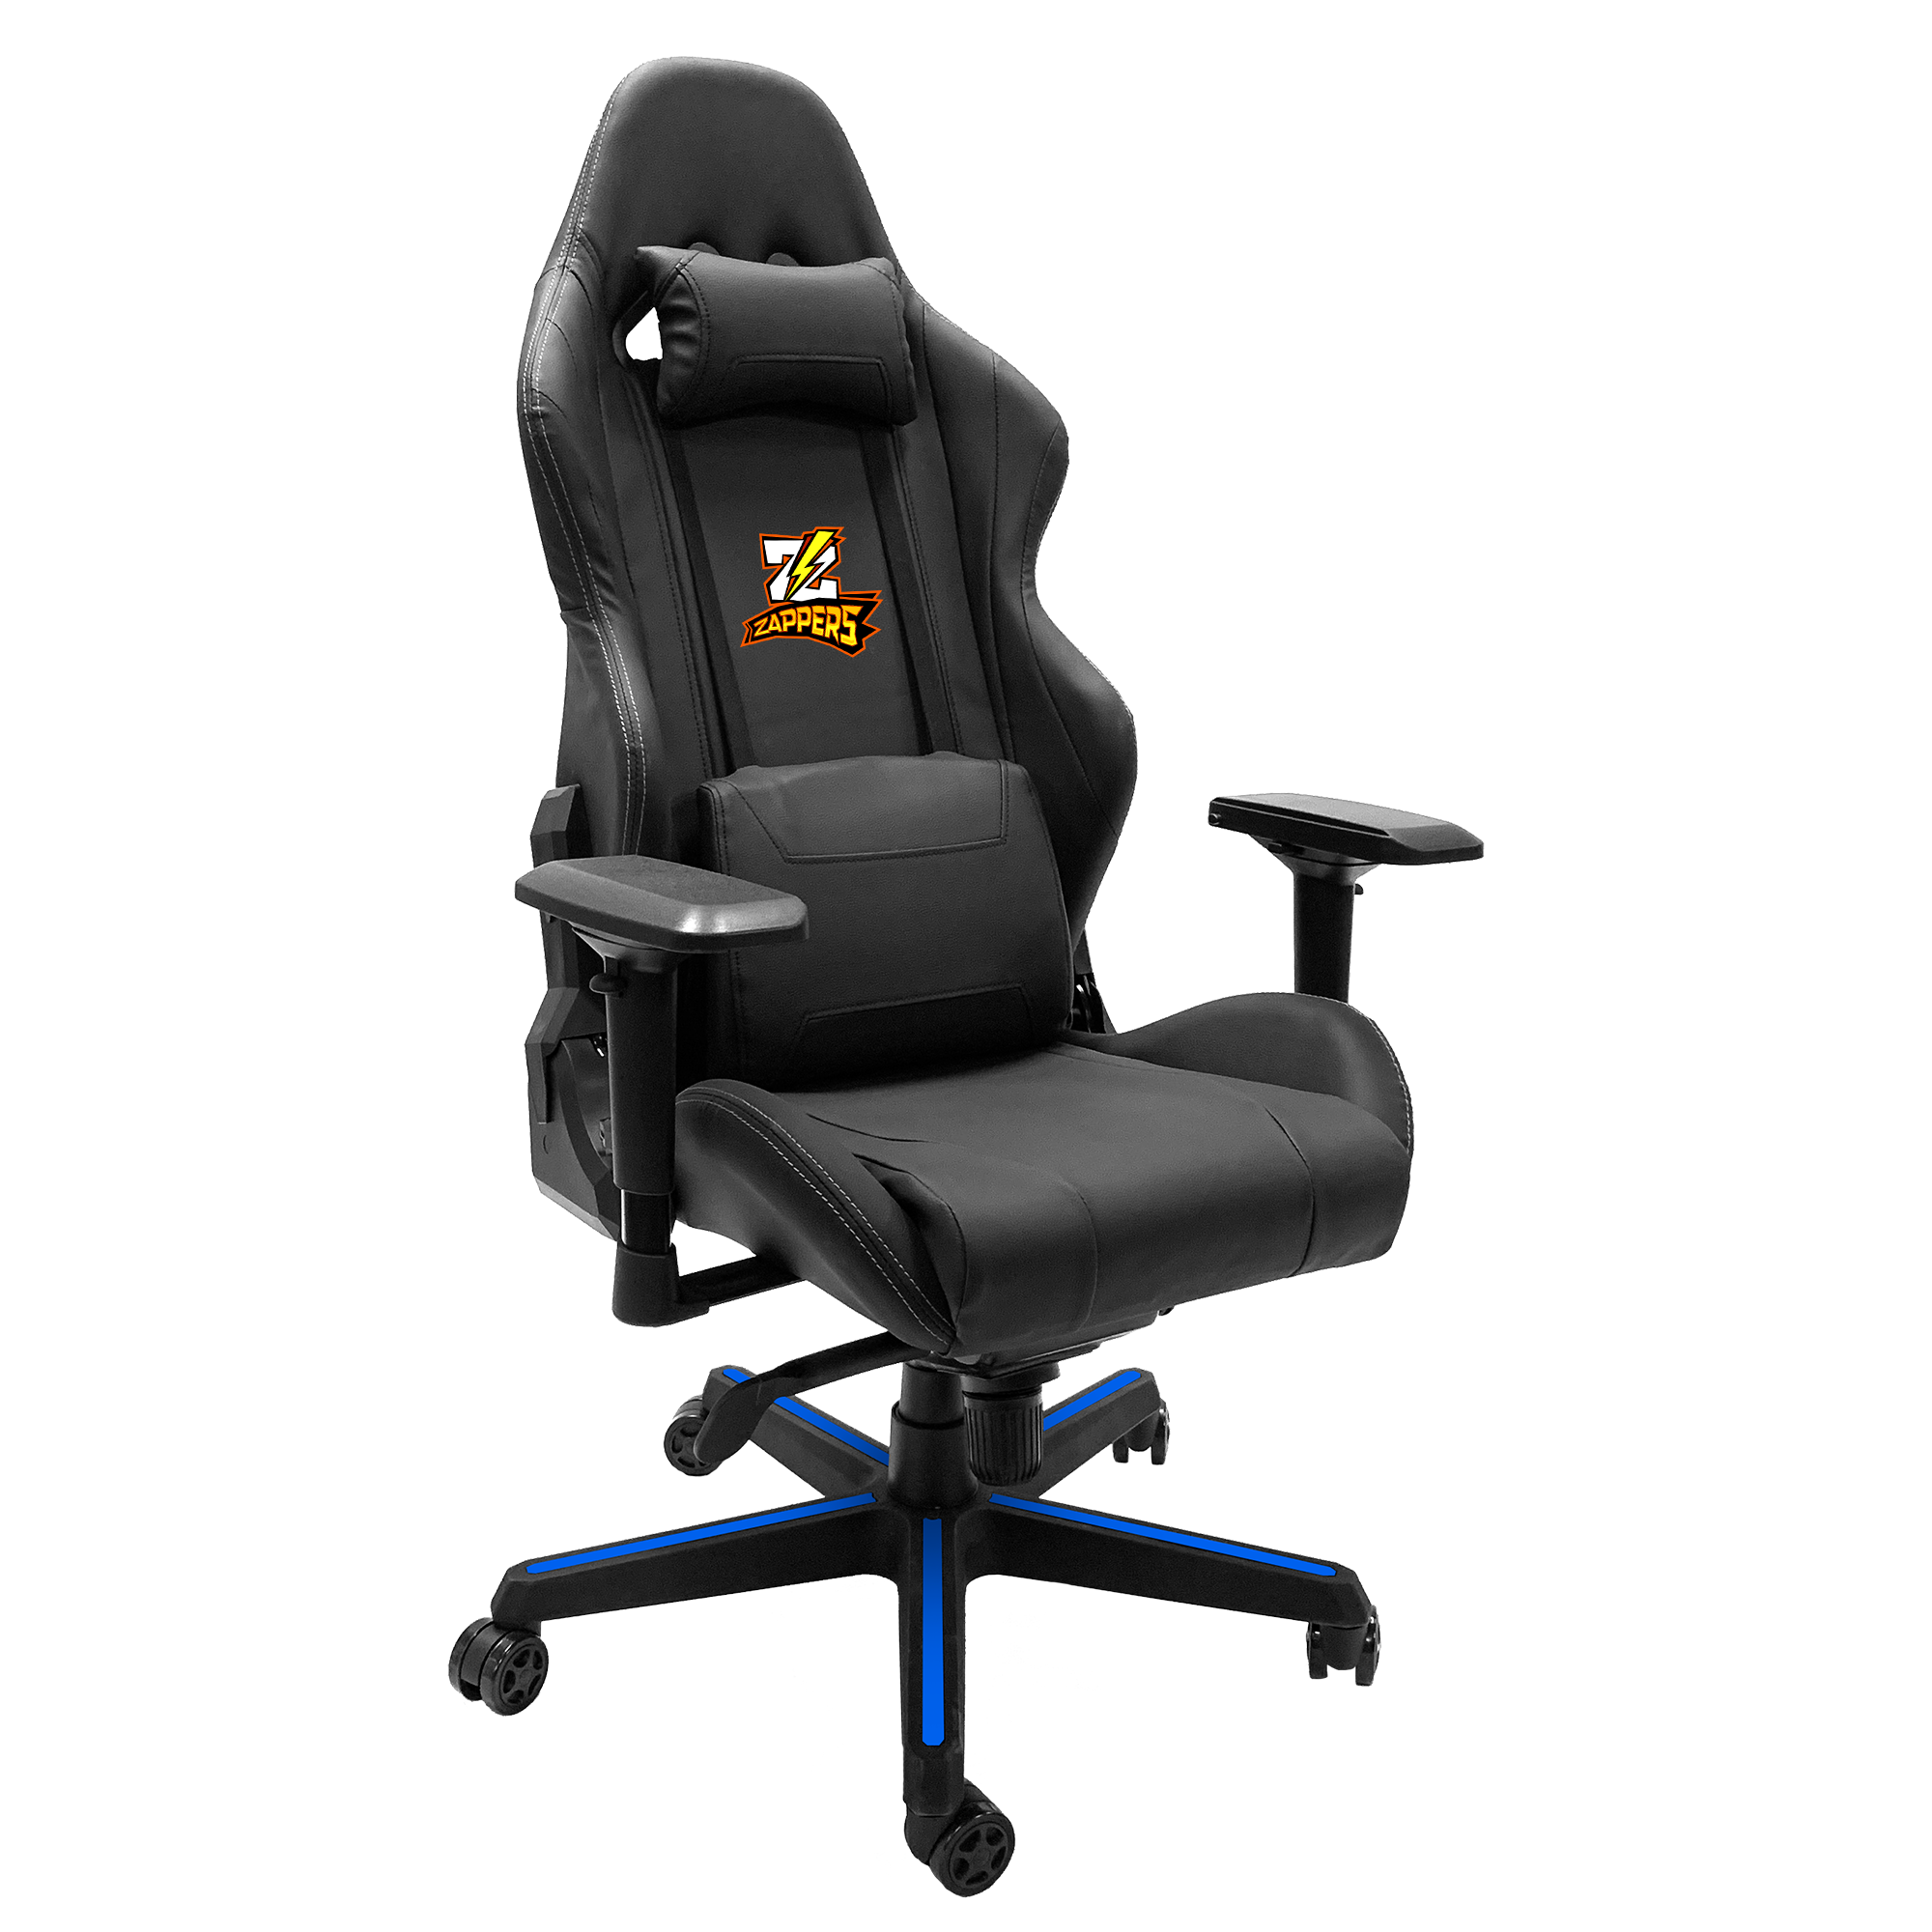  Xpression Gaming Chair  with Zappers Logo